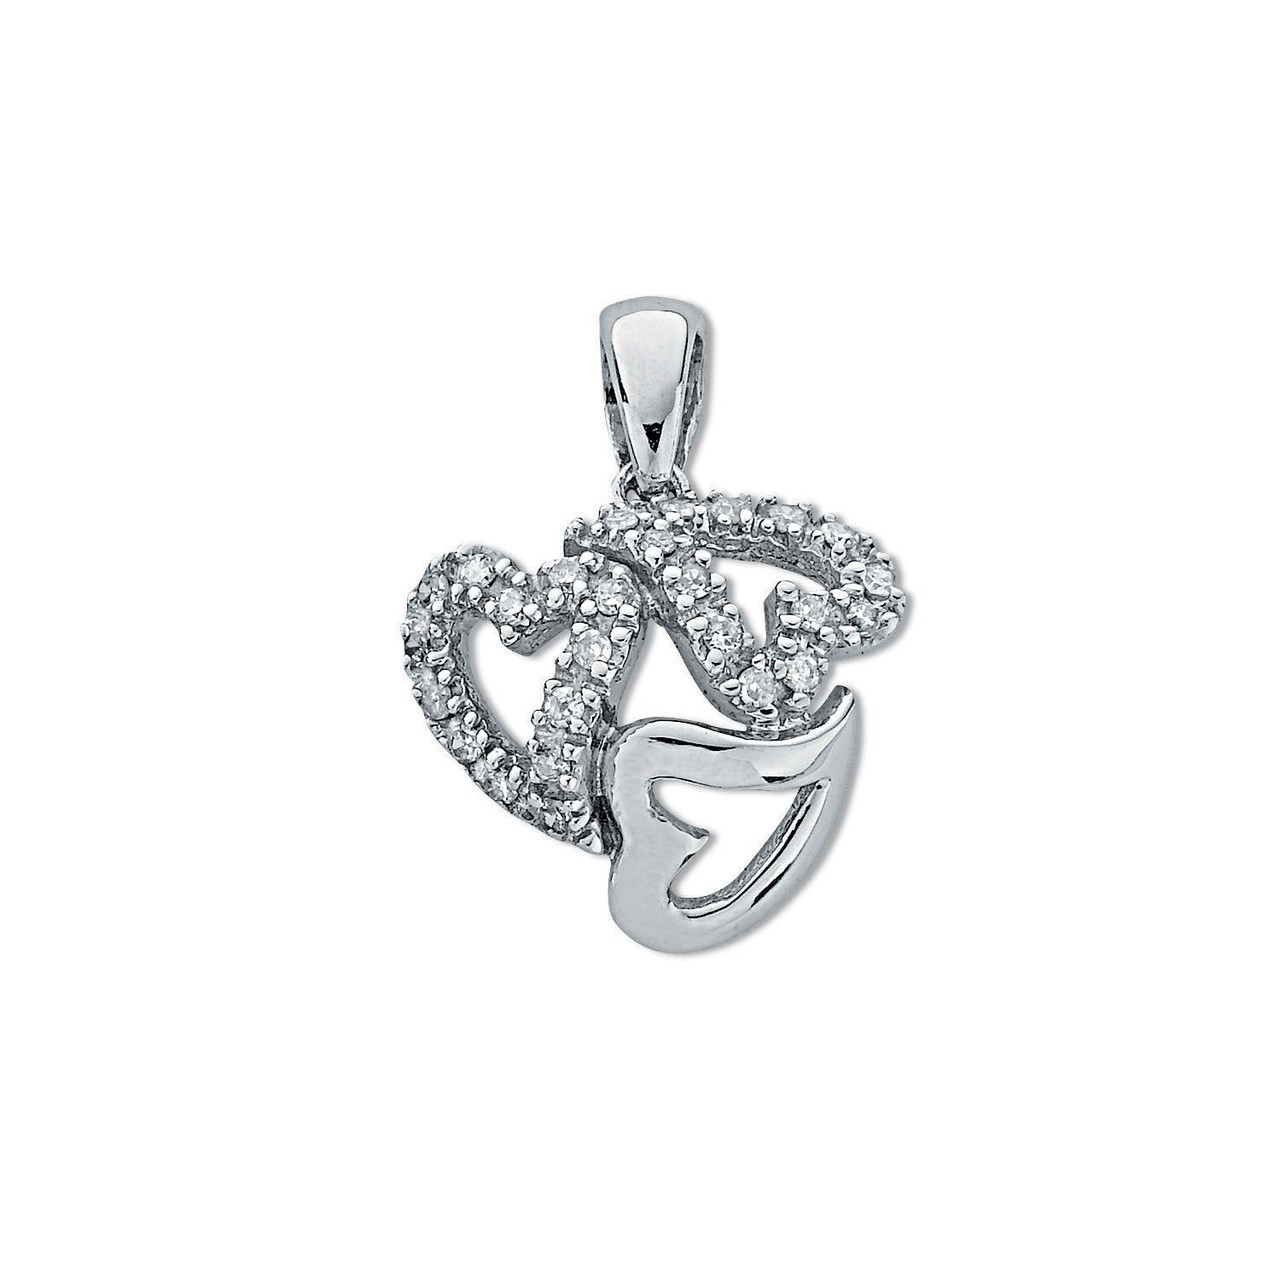 9ct White Gold 0.13ct Diamond Entwined Heart Trilogy Pendant